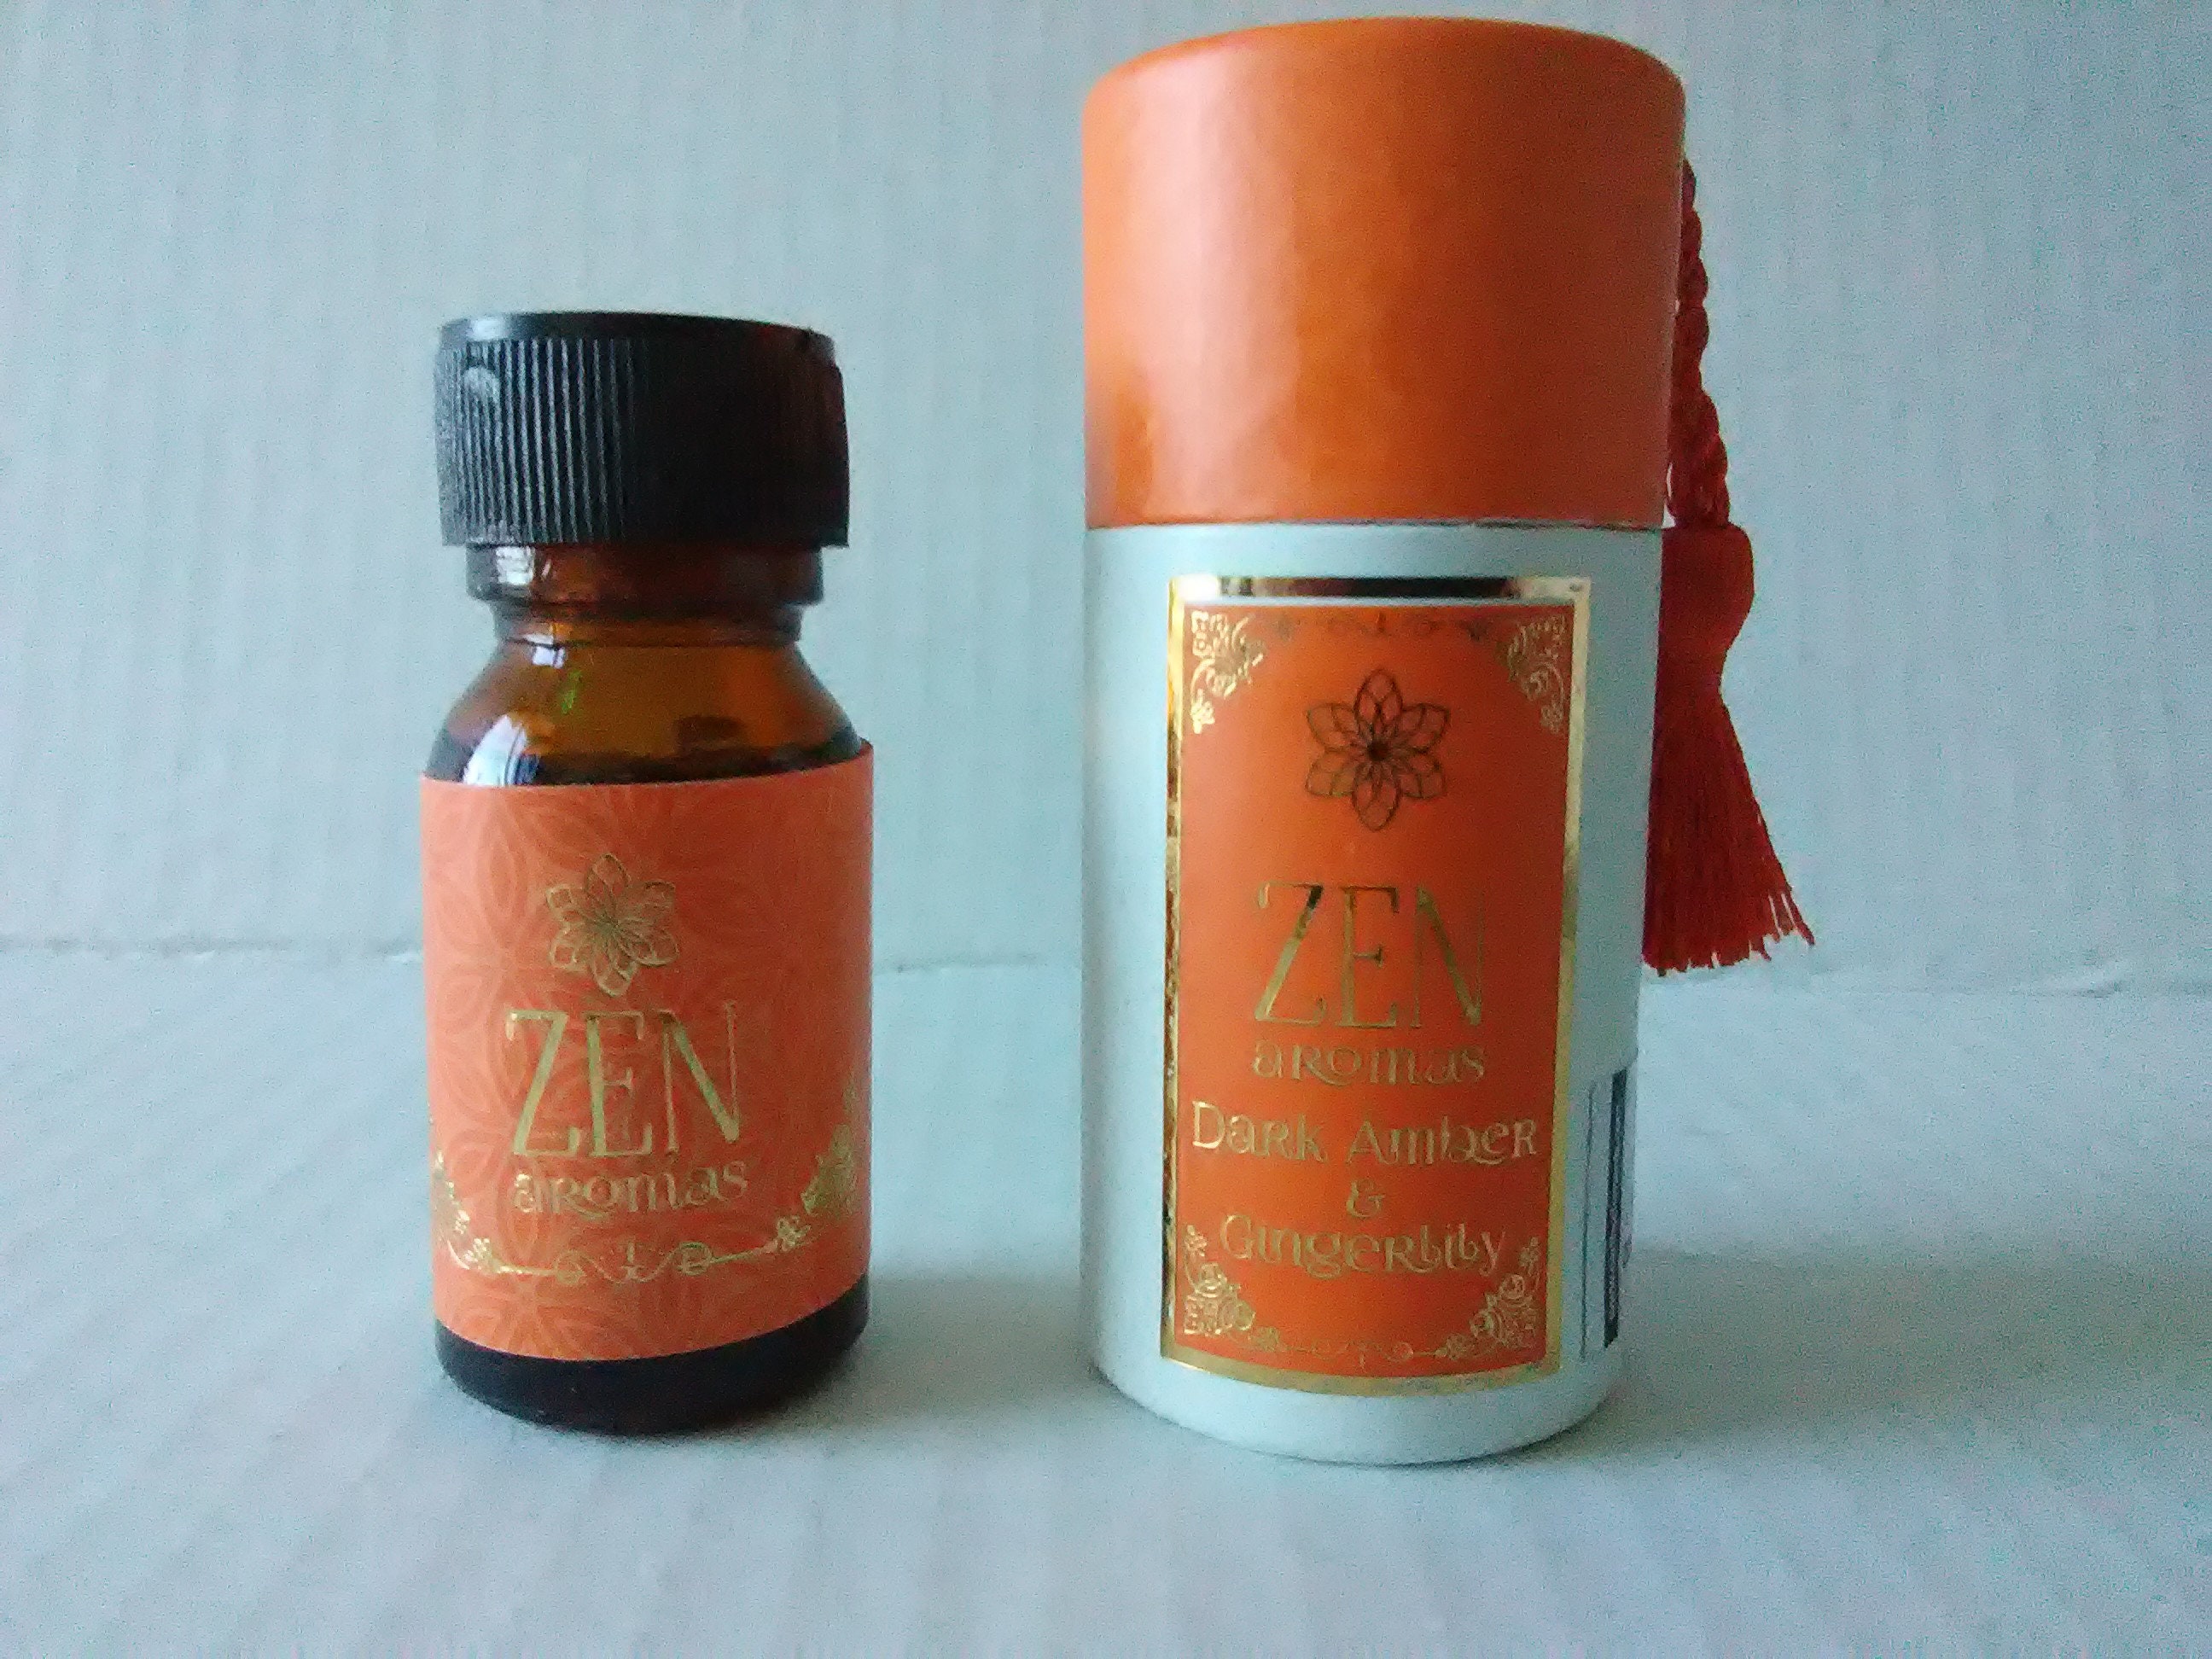 Zen Dark Amber & Ginger Lily Blend Of Essential Oils With An Orange Tassel Reusable Tube Usa - Aromatherapy